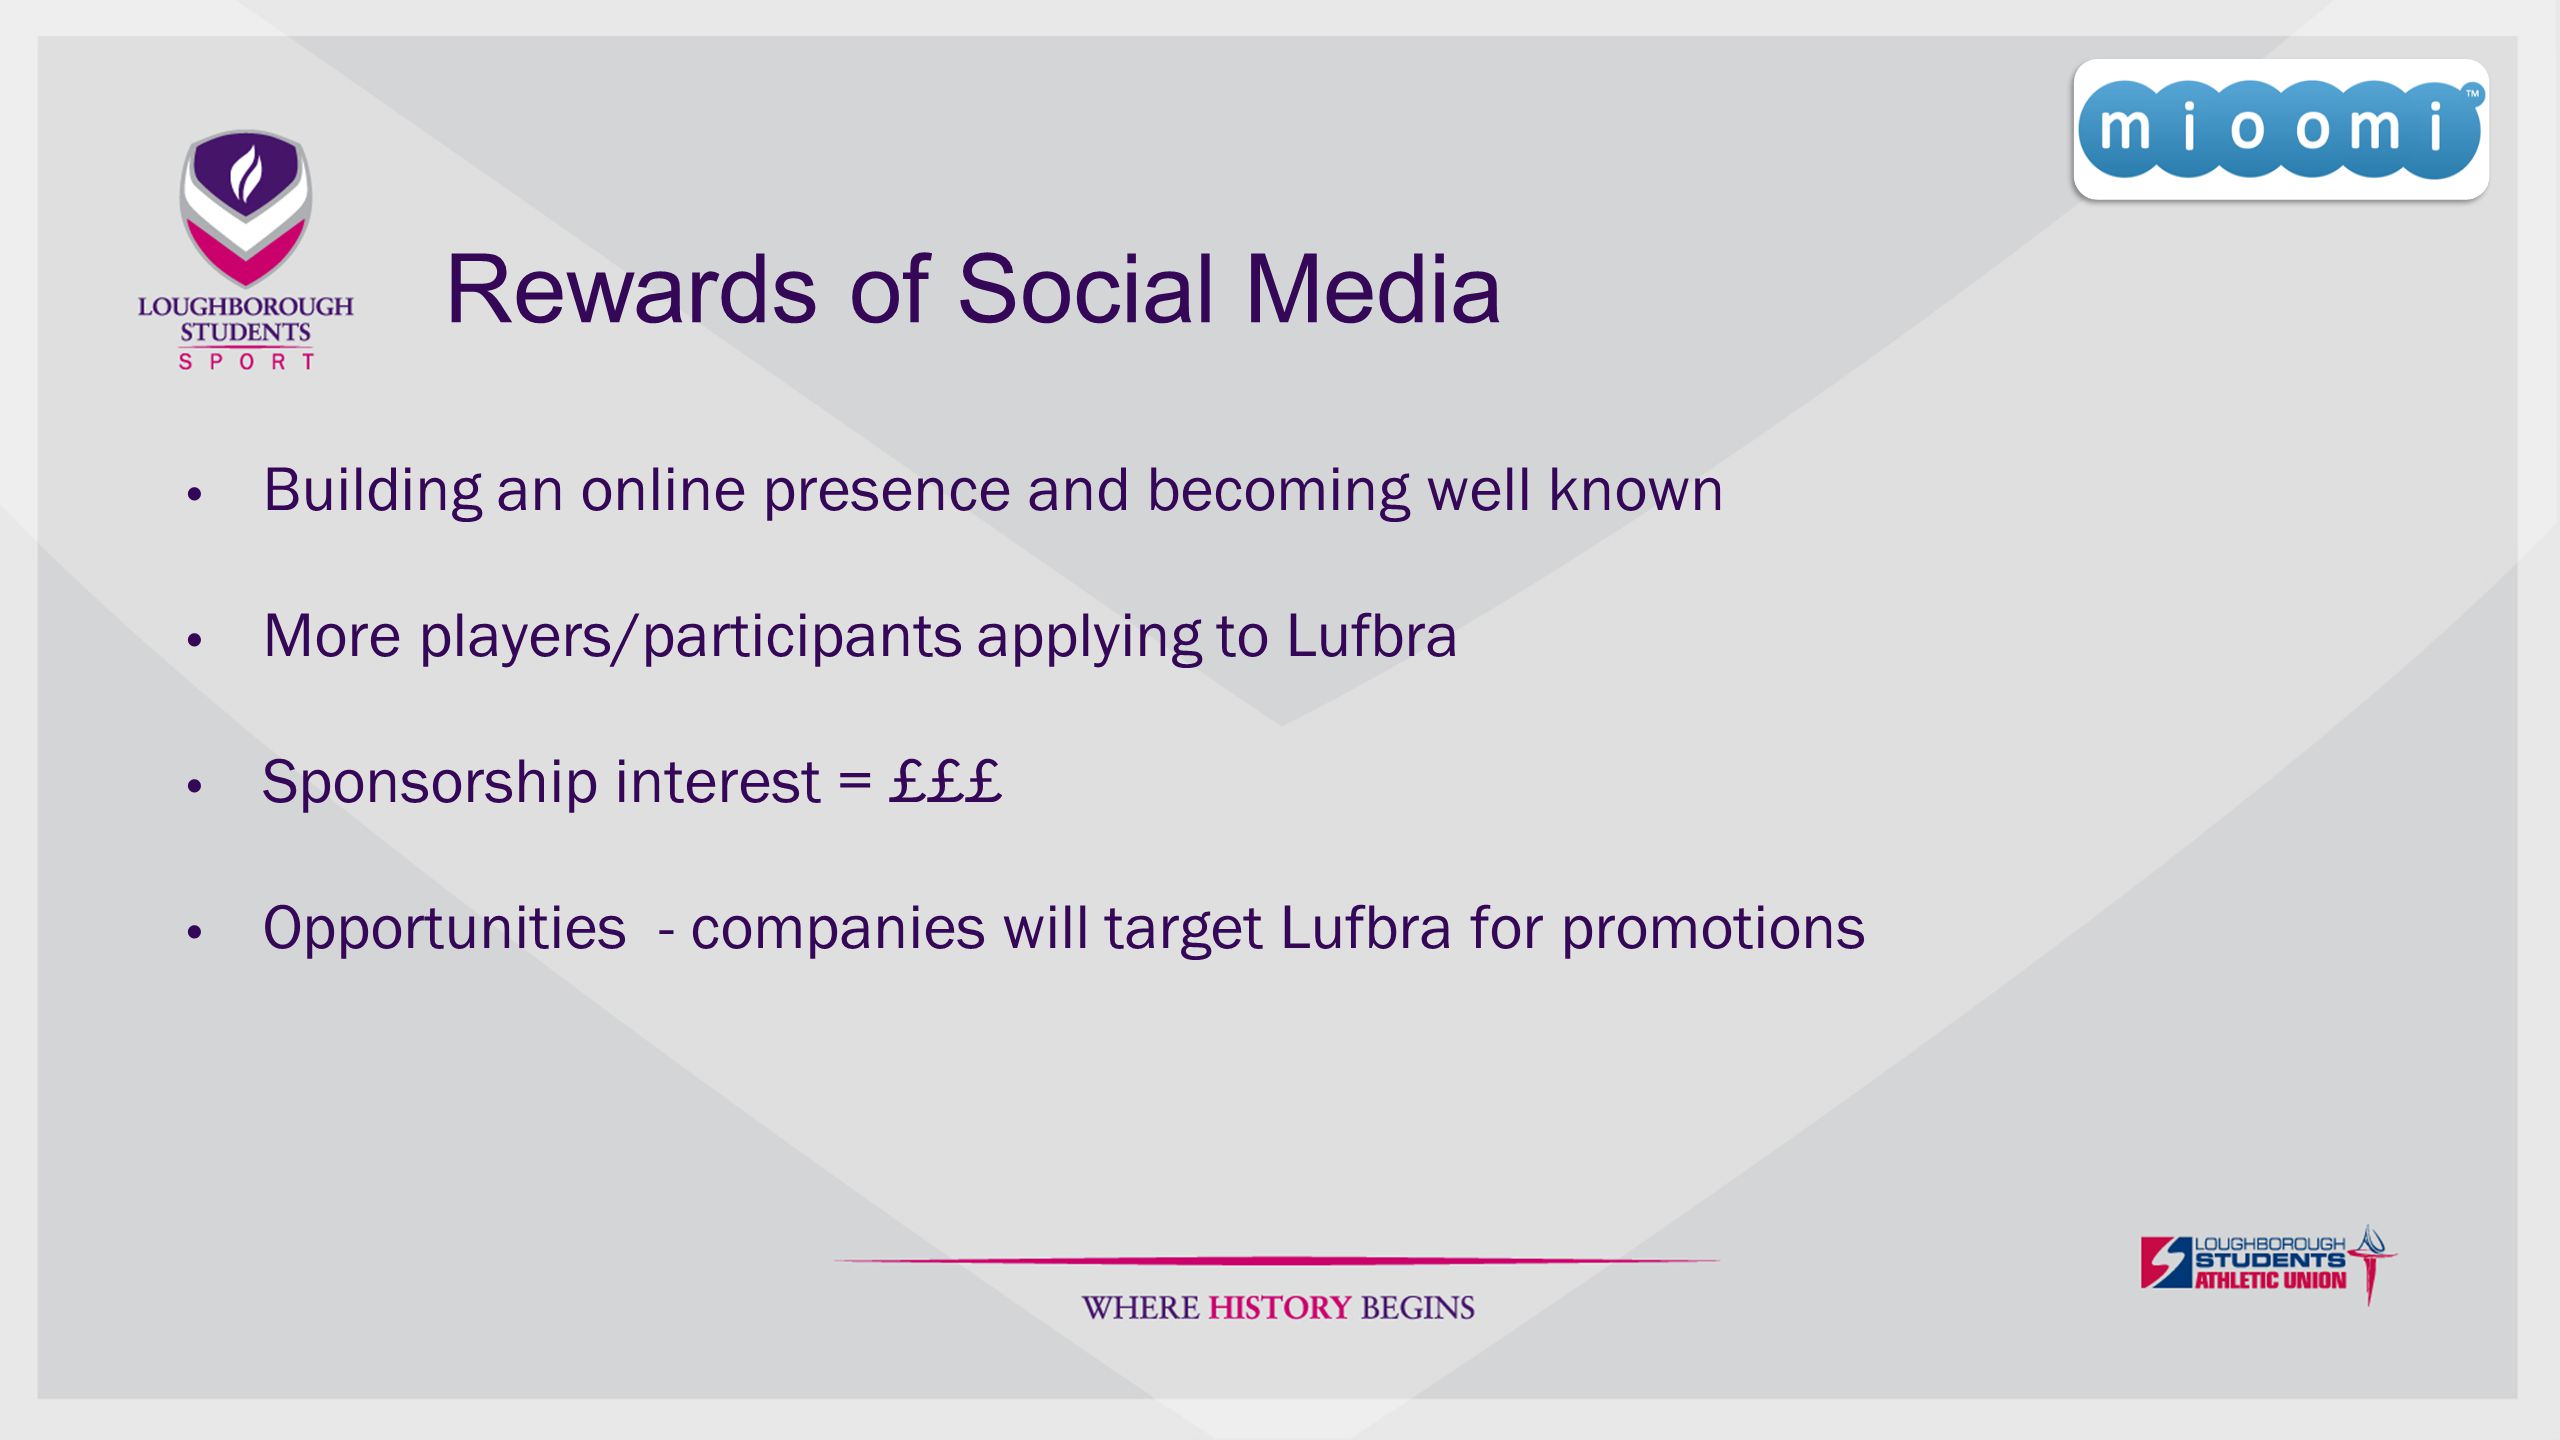 Rewards of Social Media Building an online presence and becoming well known More players/participants applying to Lufbra Sponsorship interest = £££ Opportunities - companies will target Lufbra for promotions